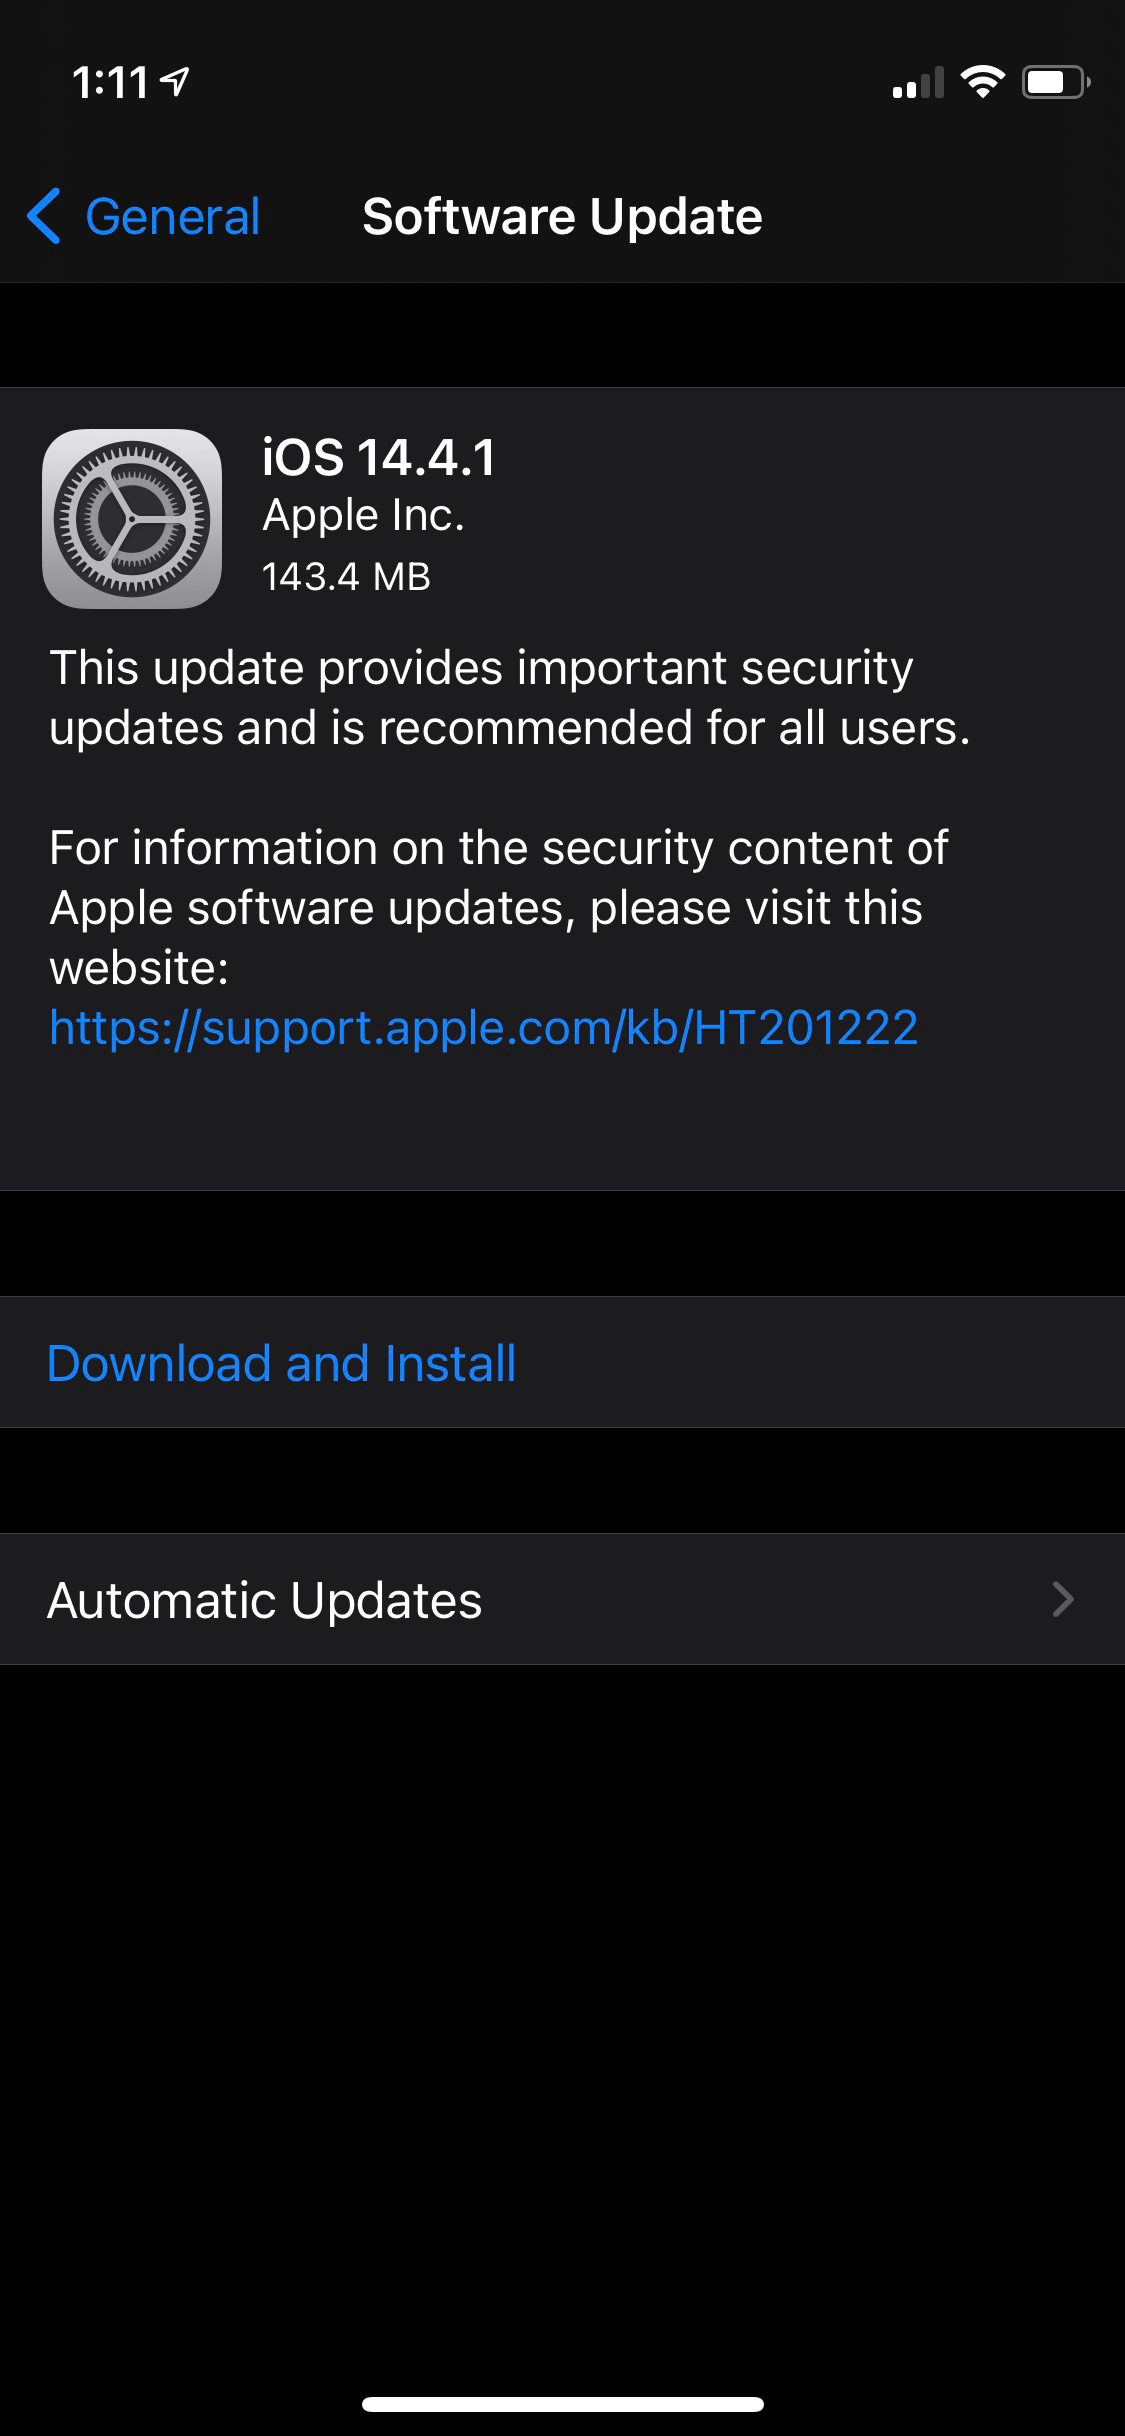 Apple Releases iOS 14.4.1 and iPadOS 14.4.1 [Download]